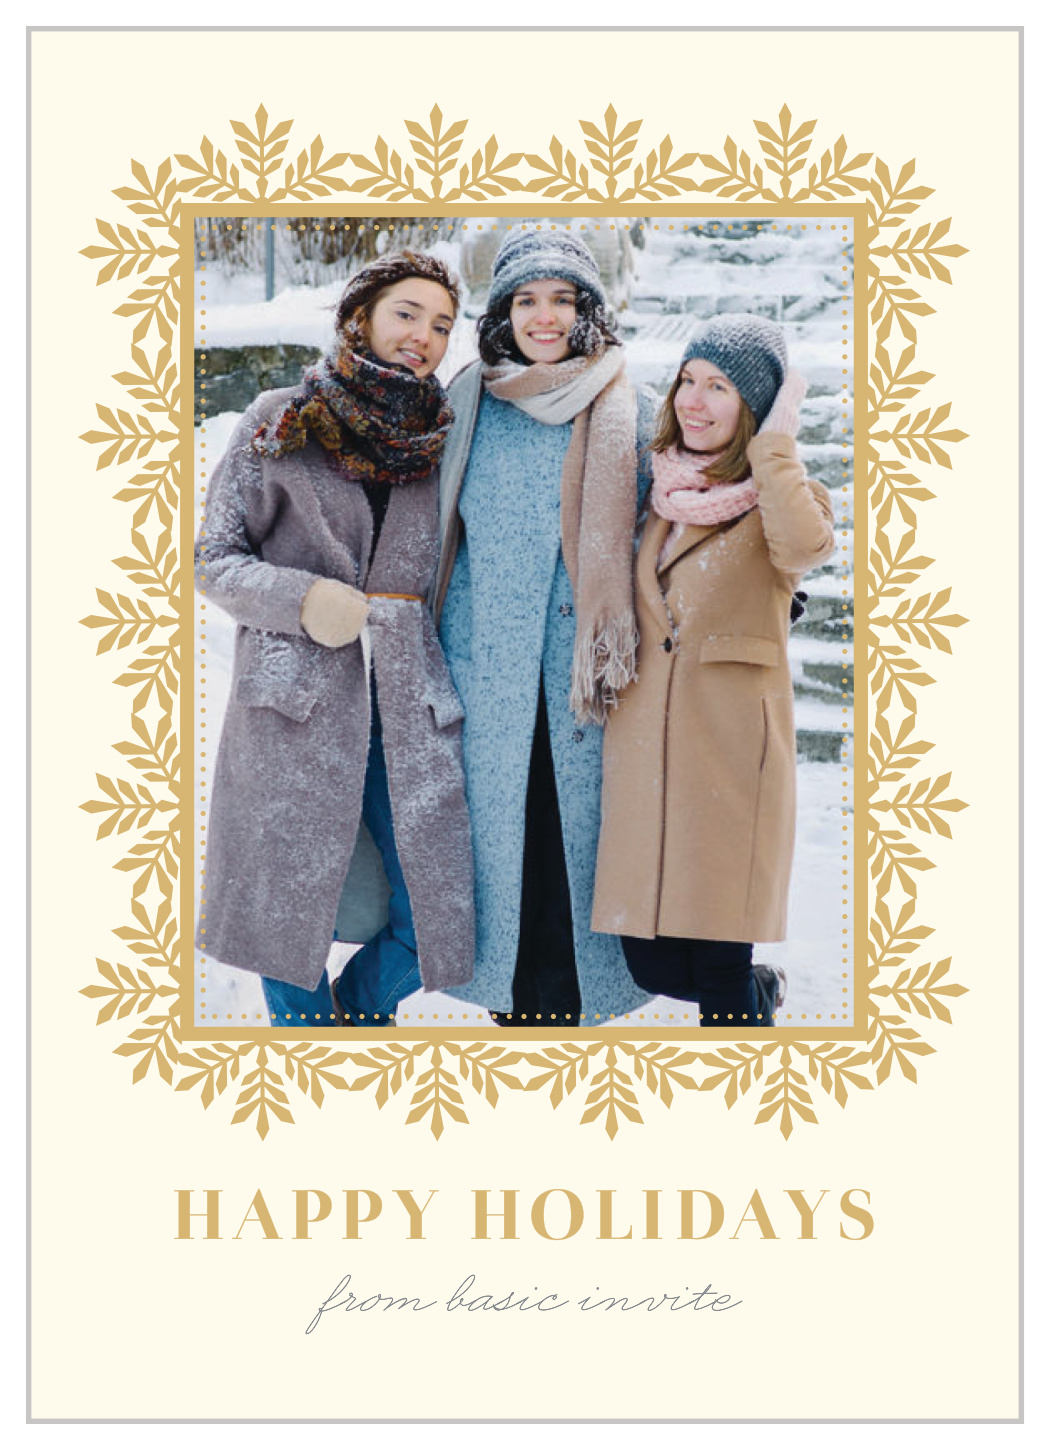 Snowflake Frame Corporate Holiday Cards